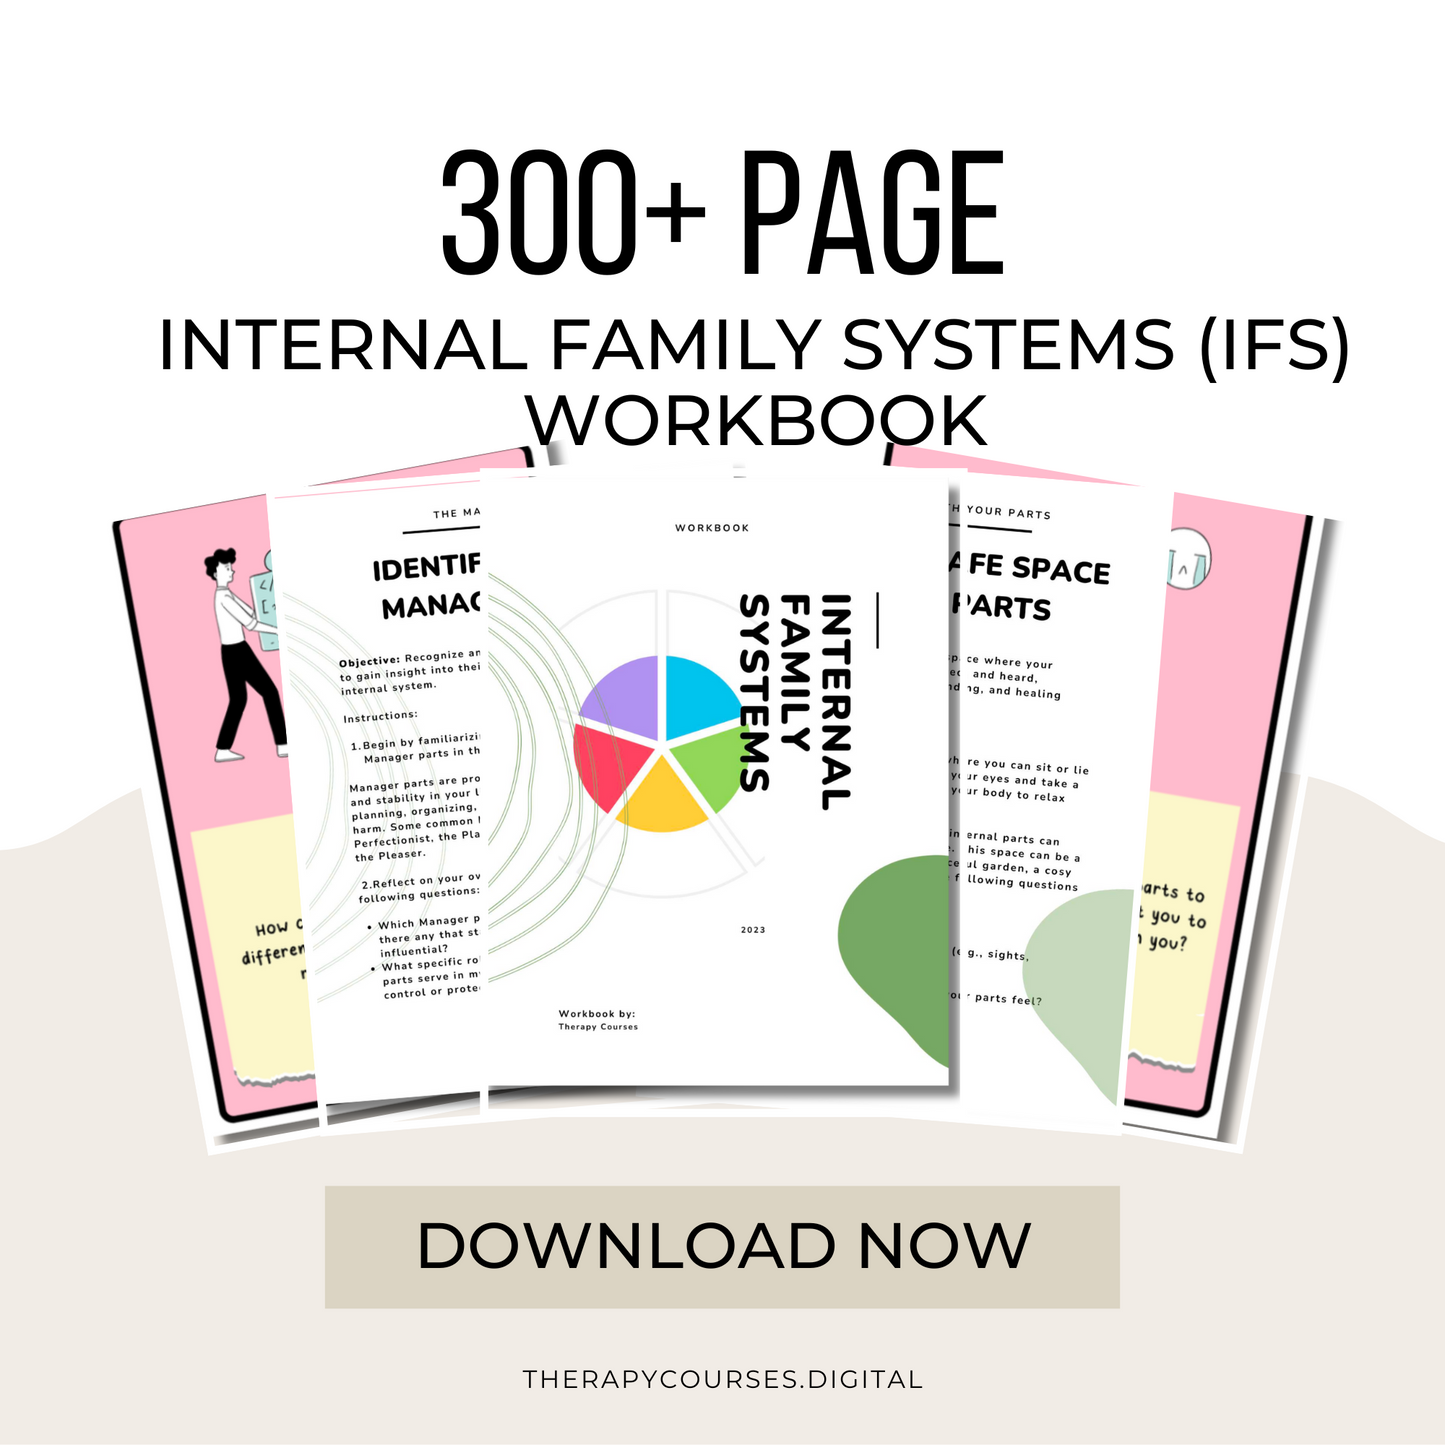 IFS Worksheets pdf - 260+ Pages of Internal Family Systems Worksheets pdf